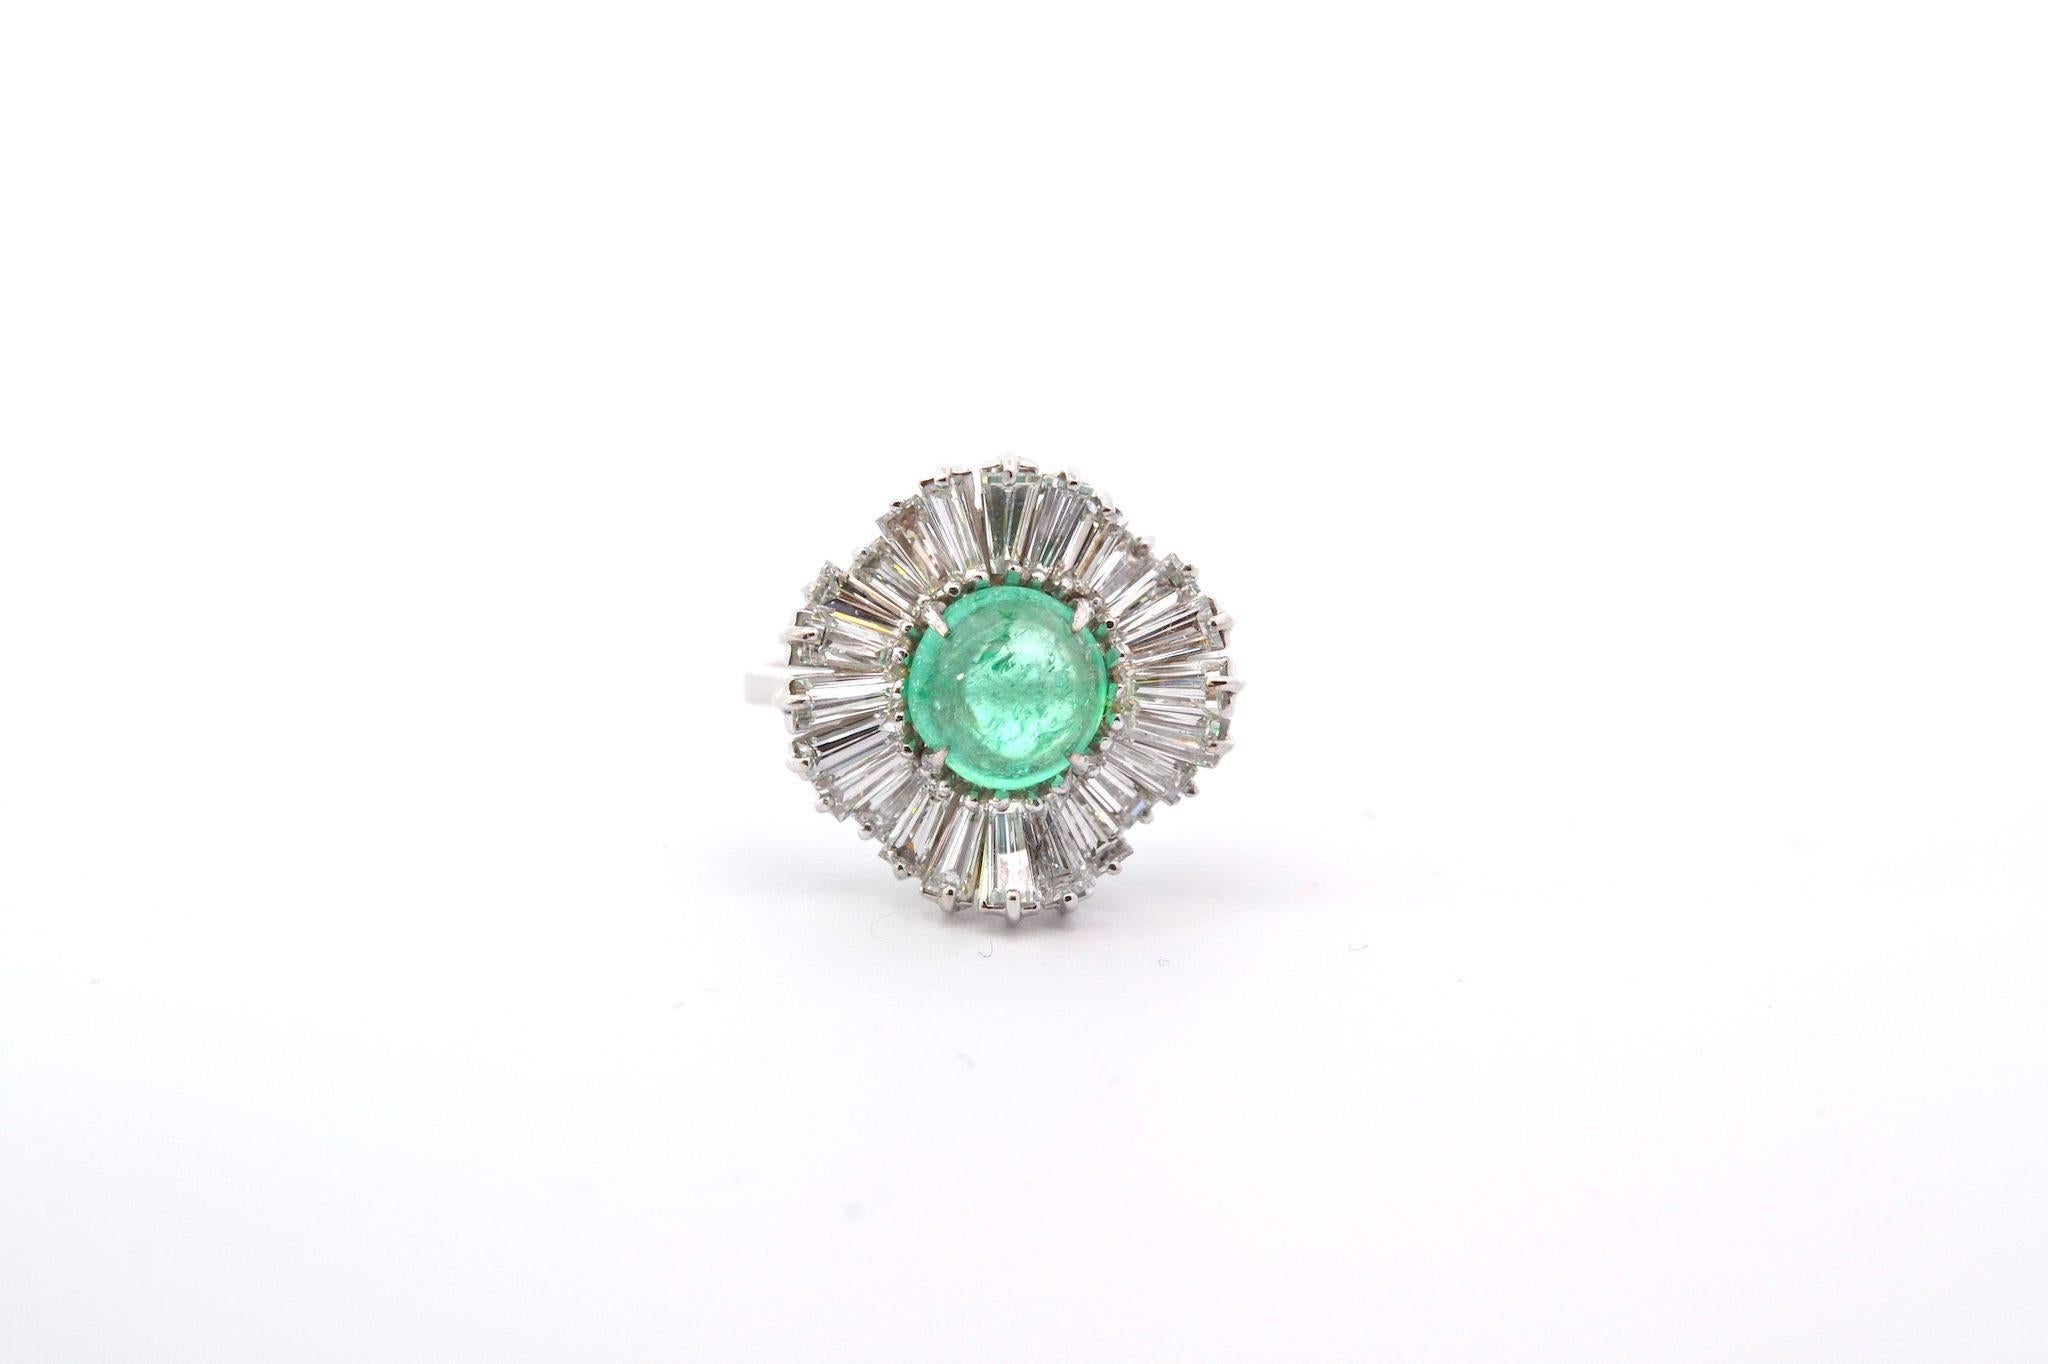 Stones: 1 cabochon emerald of 1.5cts and 24 tapers, weight: 1.40cts
Material: 18k gold
Dimensions: 1.7cm in diameter
Weight: 4.7g
Period: 1970
Size: 53 (free sizing).
Certificate
Ref. : 24905